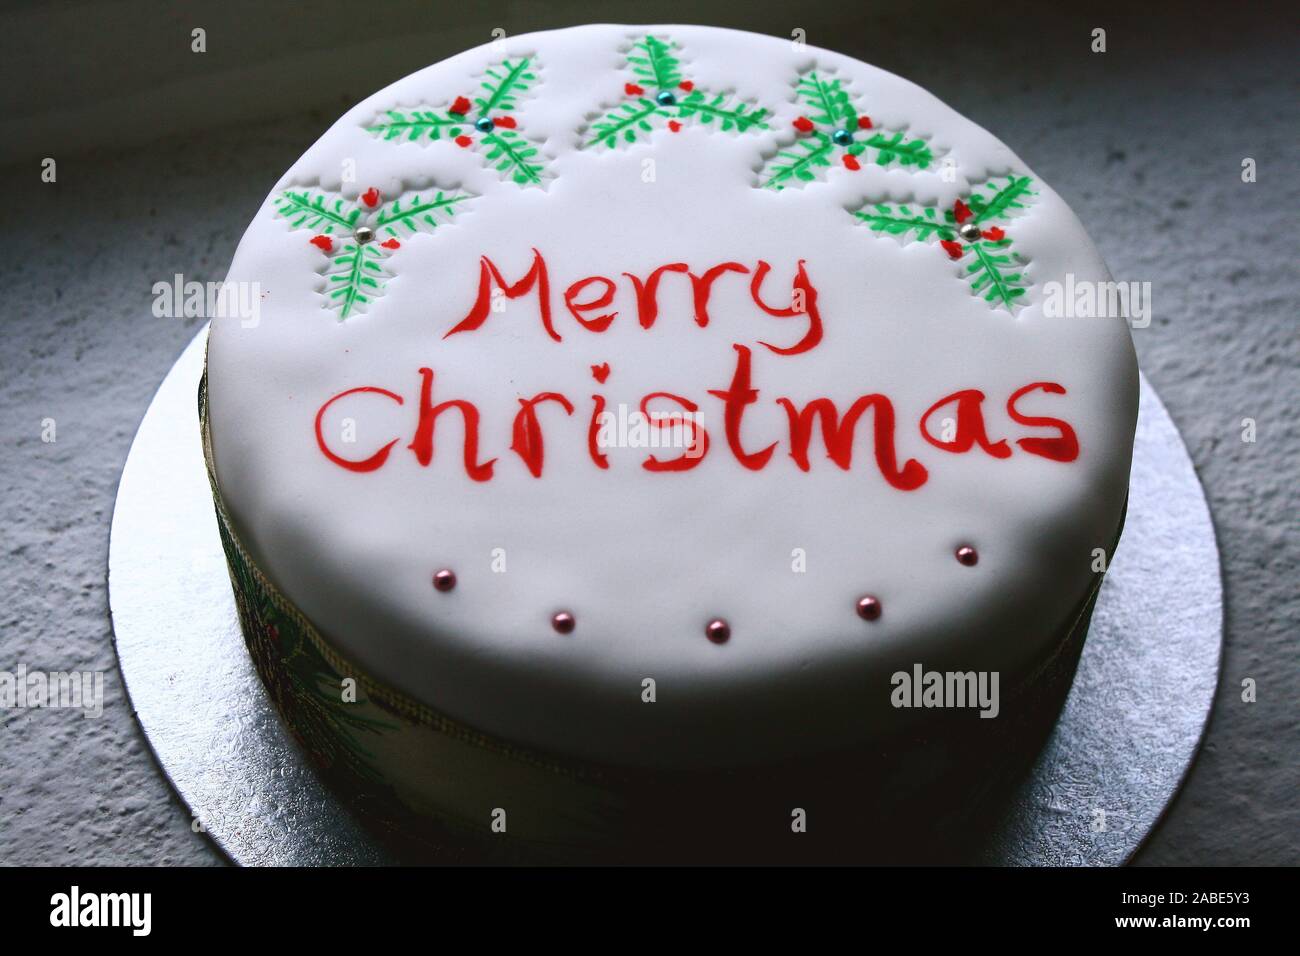 White Christmas cake with painted holy and   Merry Christmas writing on top Stock Photo